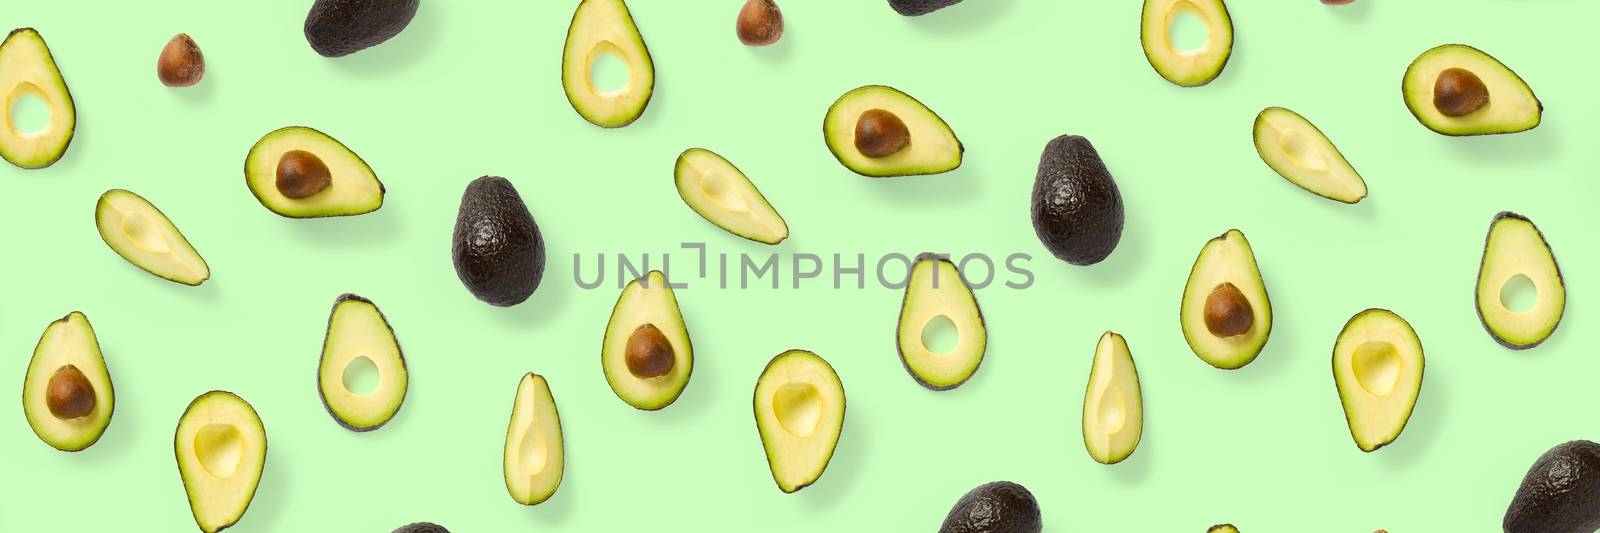 Avocado banner. Background made from isolated Avocado pieces on green background. Flat lay of fresh ripe avocados and avacado pieces. by PhotoTime